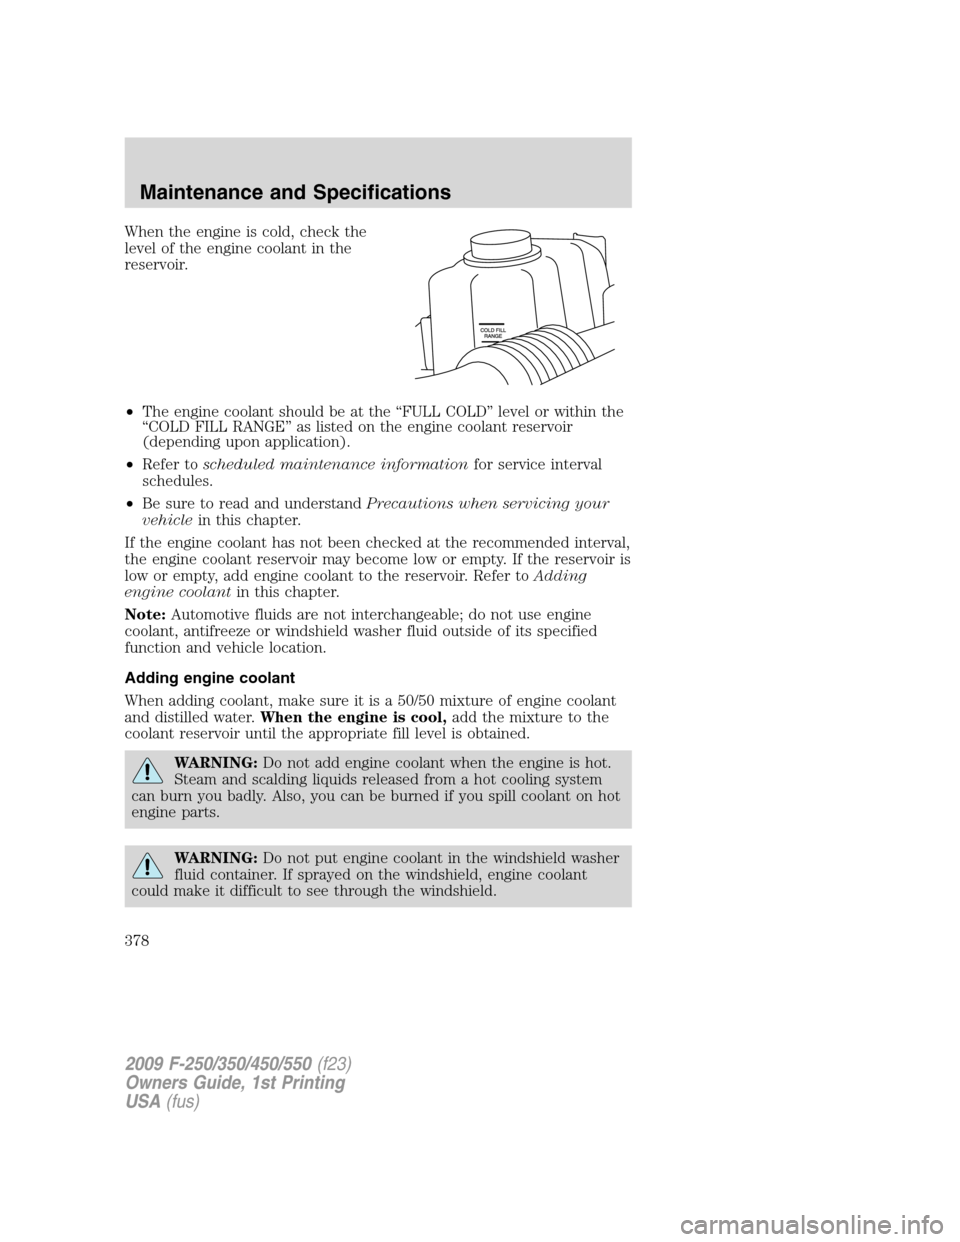 FORD SUPER DUTY 2009 2.G Owners Manual When the engine is cold, check the
level of the engine coolant in the
reservoir.
•The engine coolant should be at the “FULL COLD” level or within the
“COLD FILL RANGE” as listed on the engin